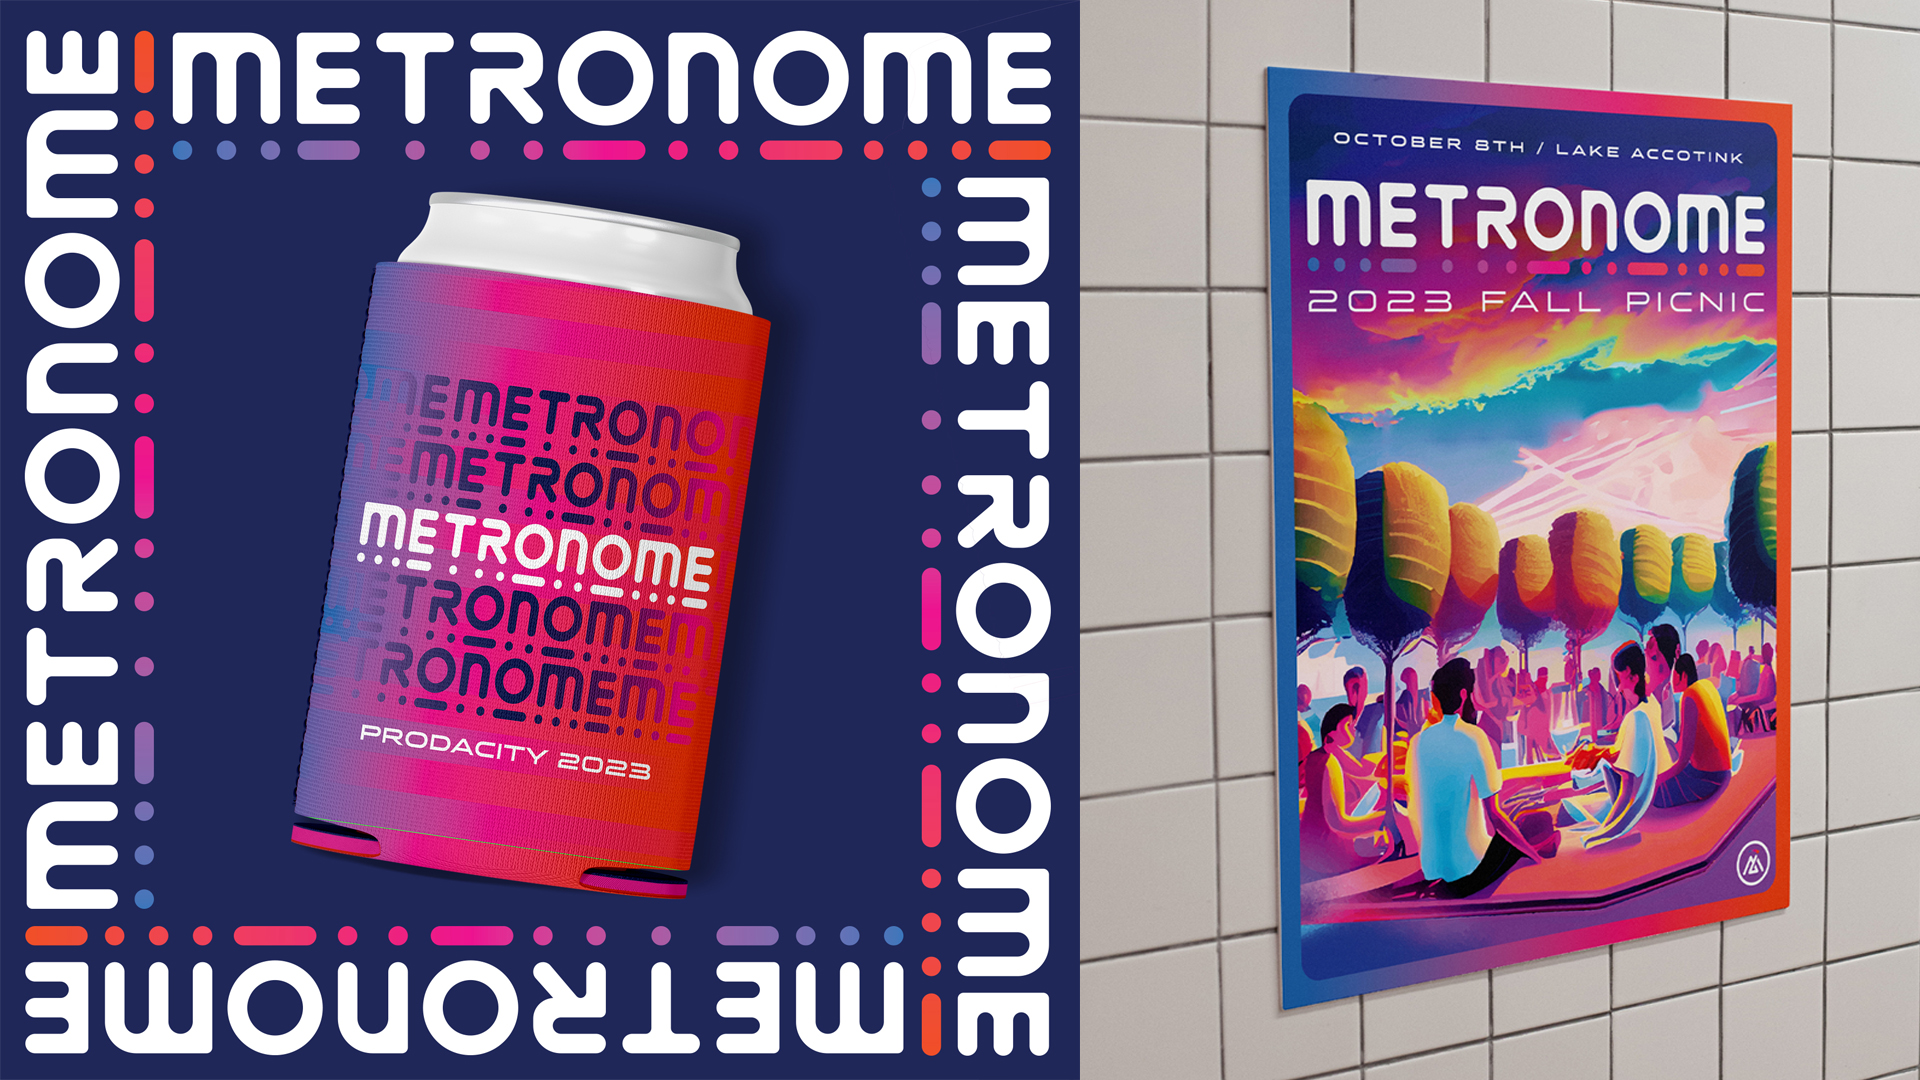 Metronome Koozie and Poster Design